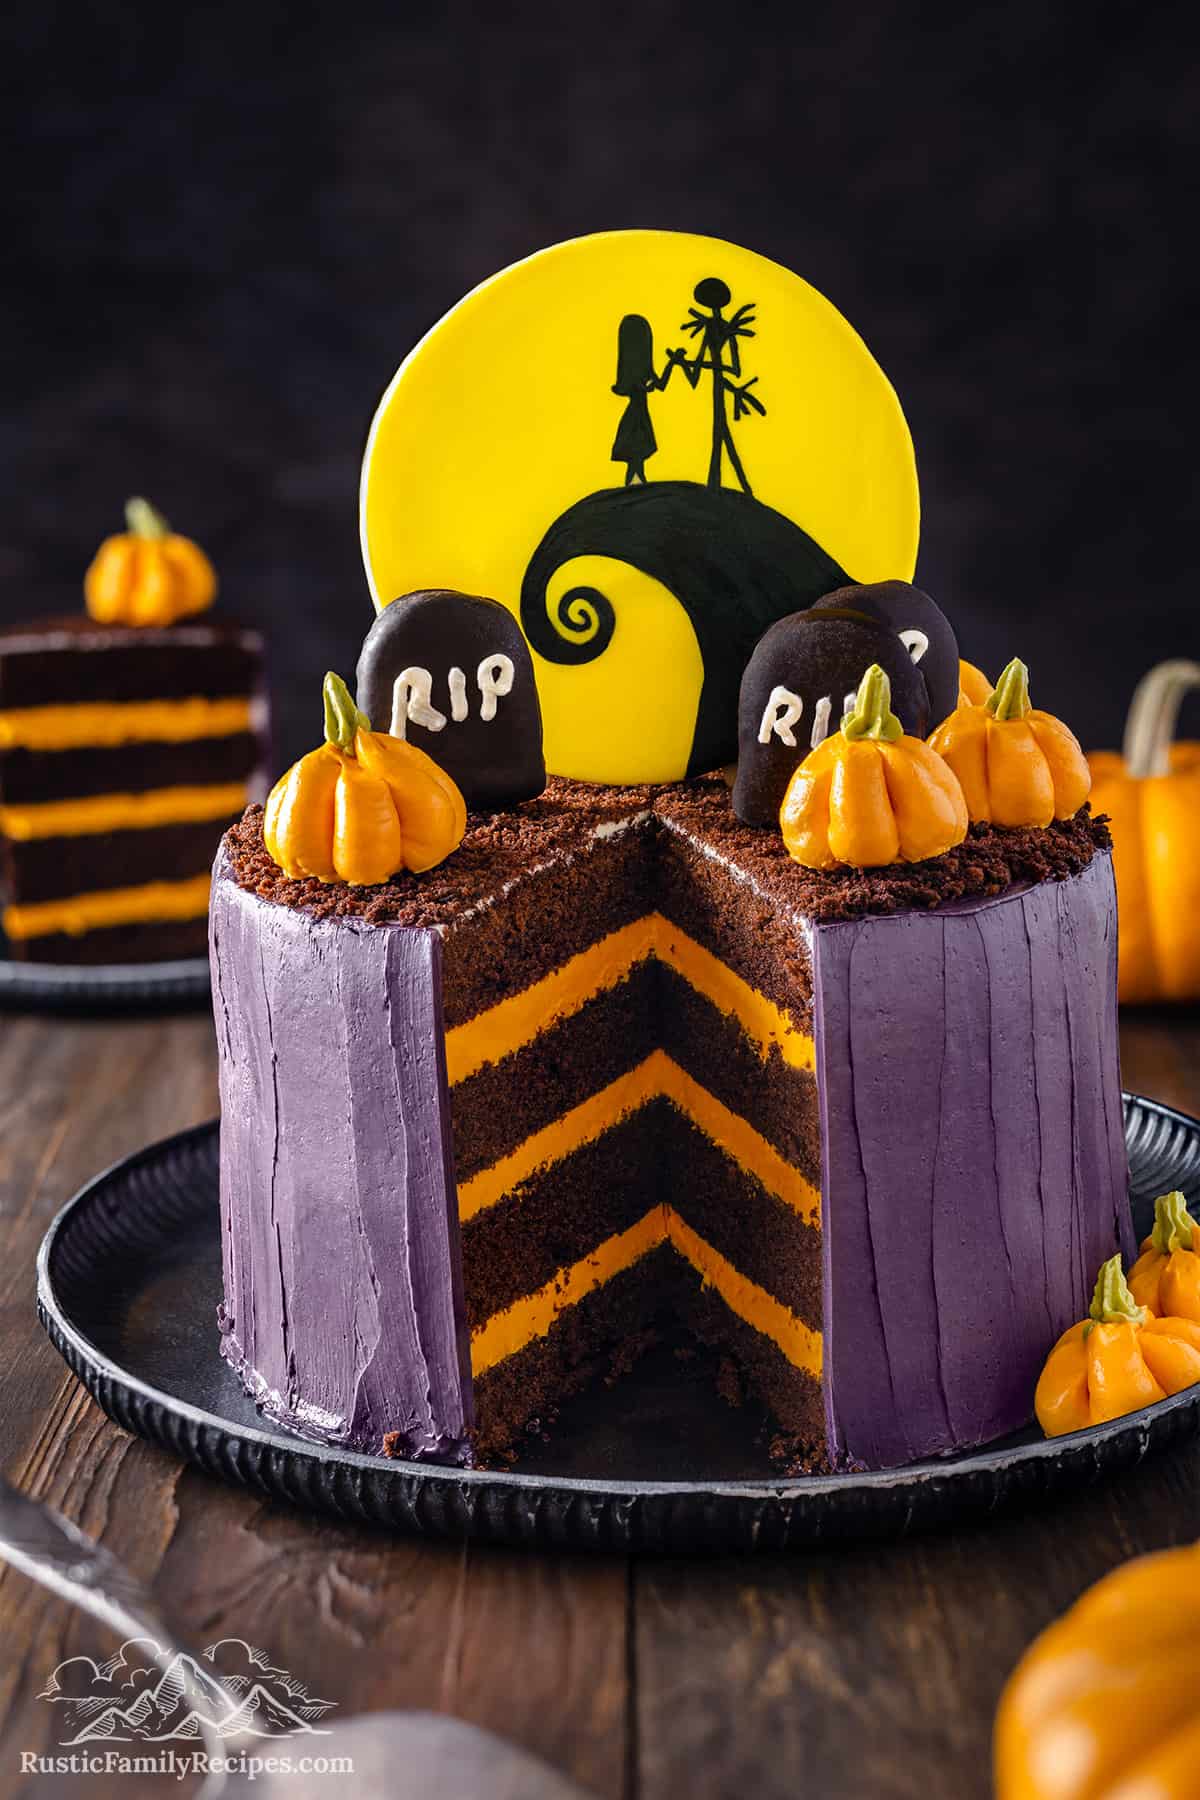 Jack Skellington cake with a slice taken out so you can see the layers of chocolate cake and orange buttercream